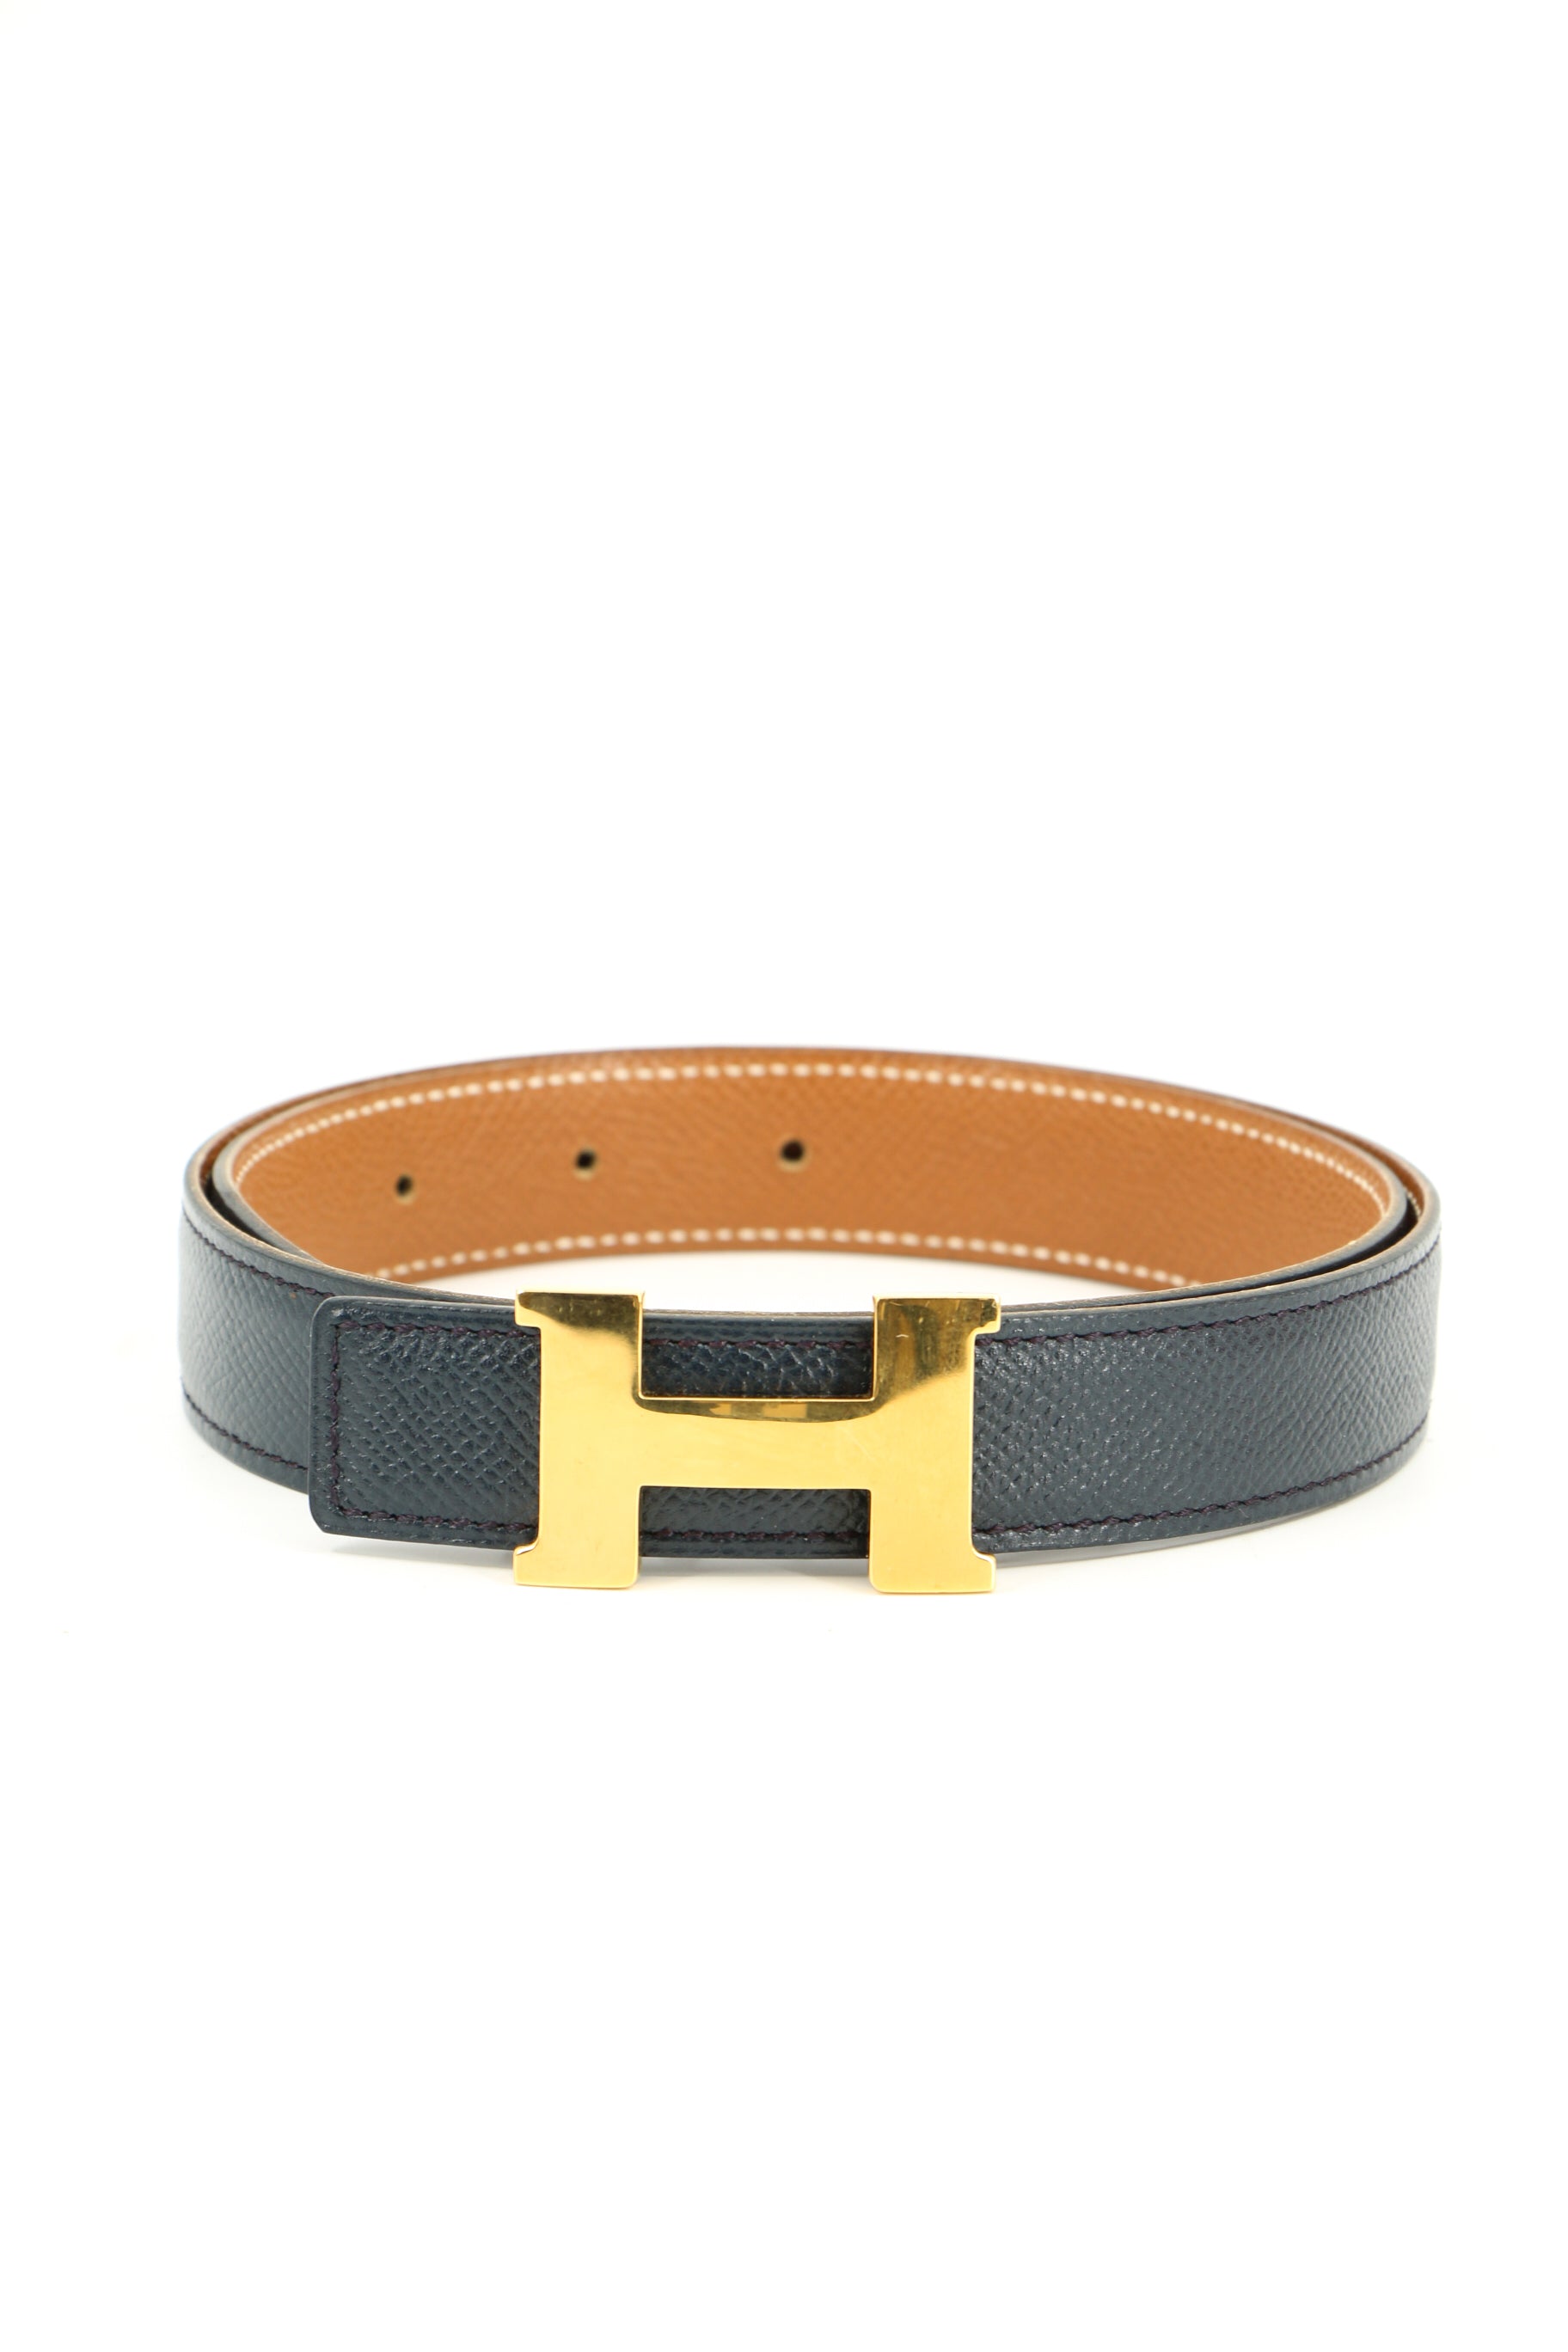 Exotic belt straps replacement for H and LV shape buckles